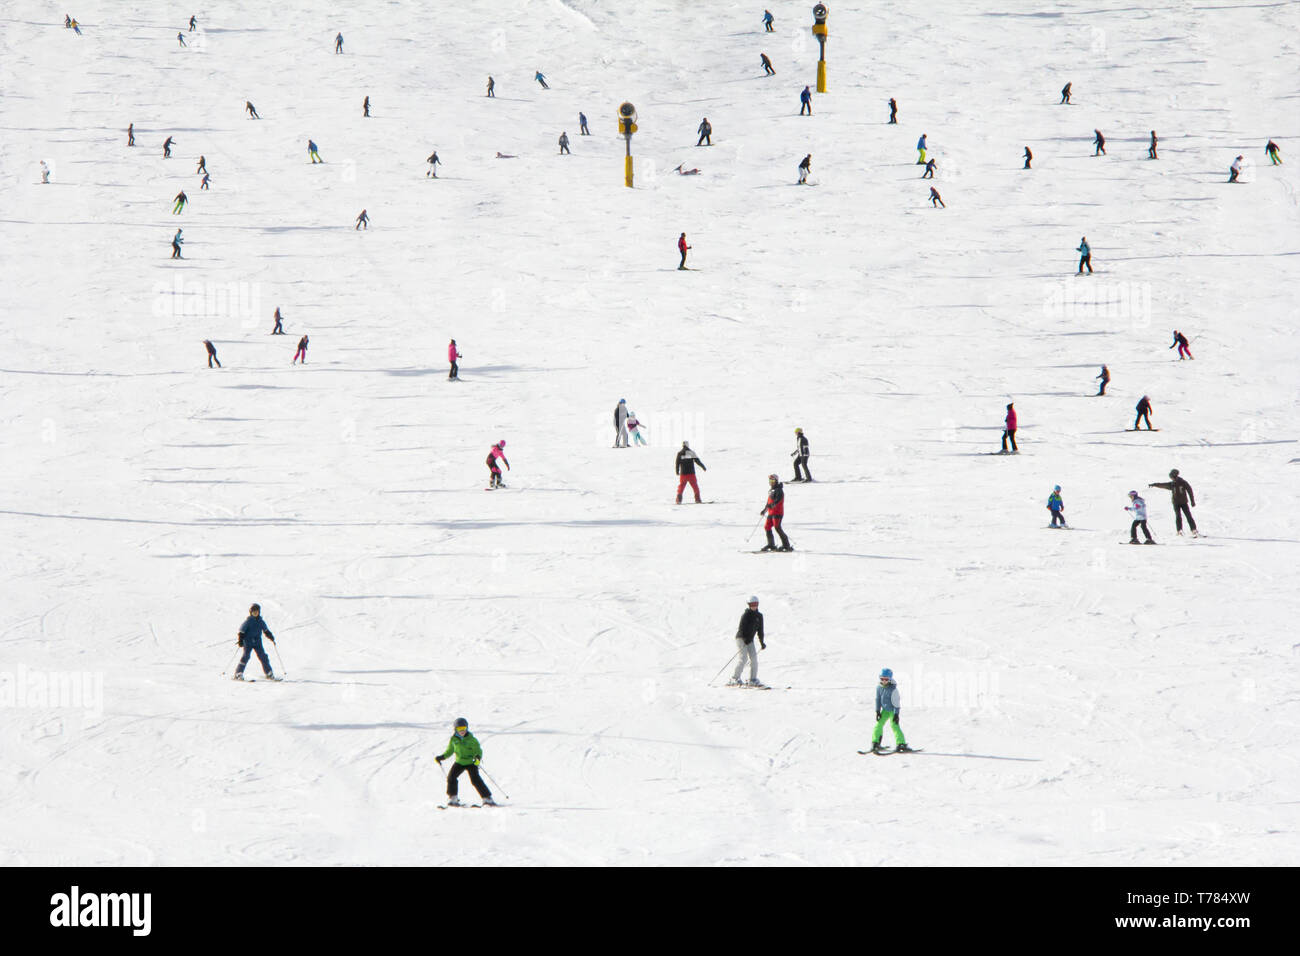 Lots of skiers and snowboarders on the slope at ski resort Stock Photo